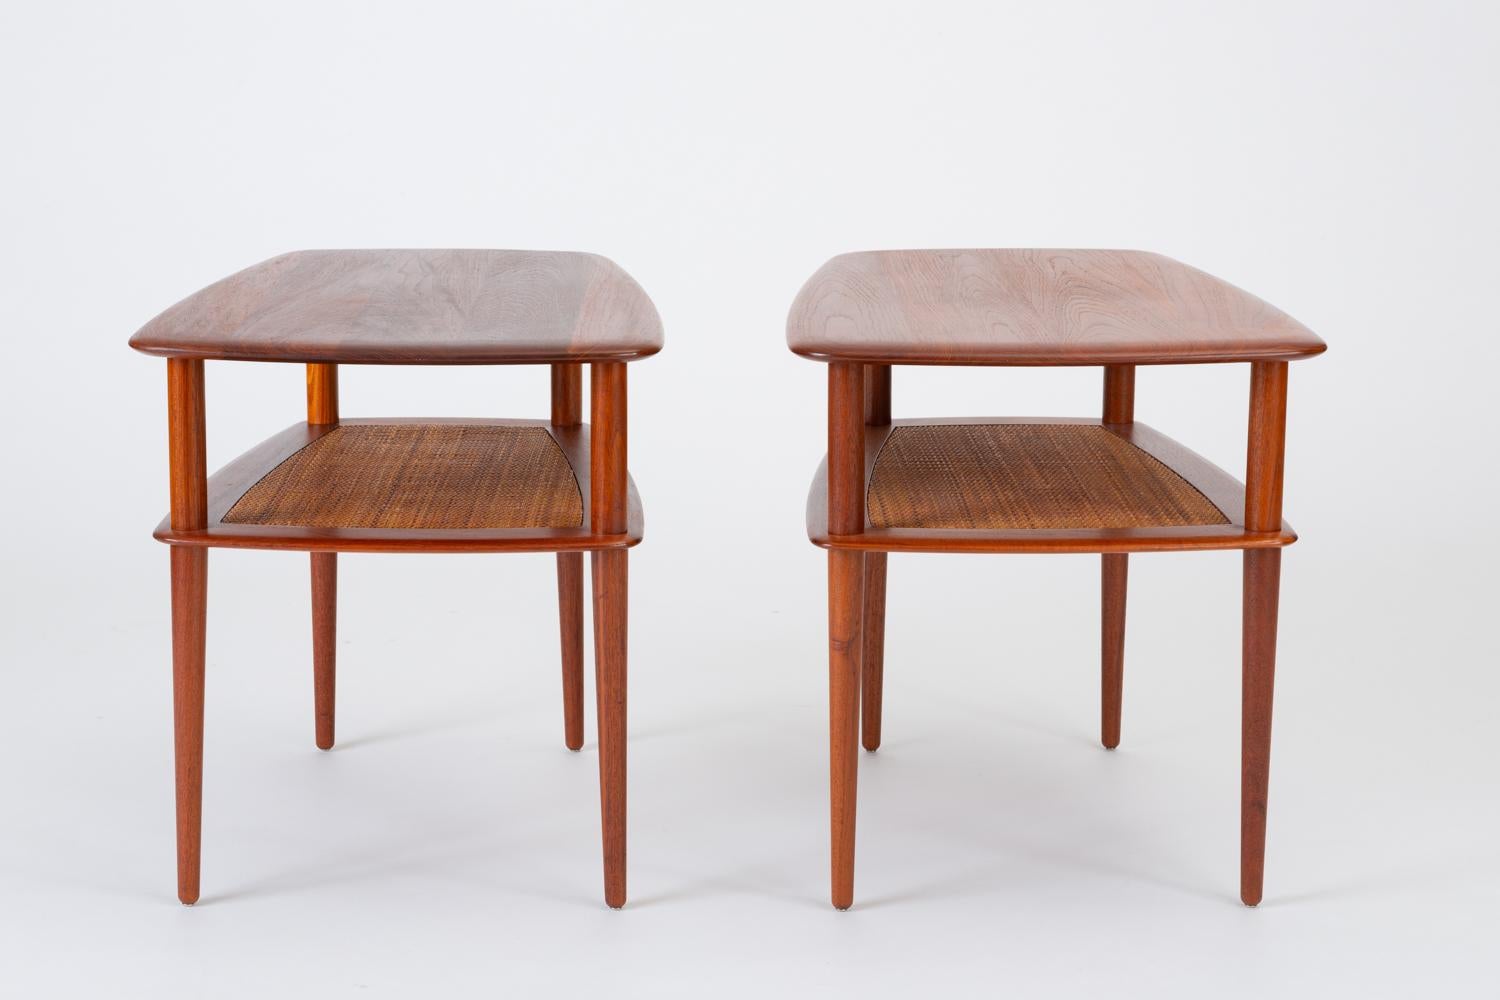 A pair of teak side tables made by France & Daverkosen for retail in the US by John Stuart. Designed by Peter Hvidt and Orla Mølgaard-Nielsen and produced in 1956, these tall tables have a rounded, trapezoidal surface in solid teak with slightly